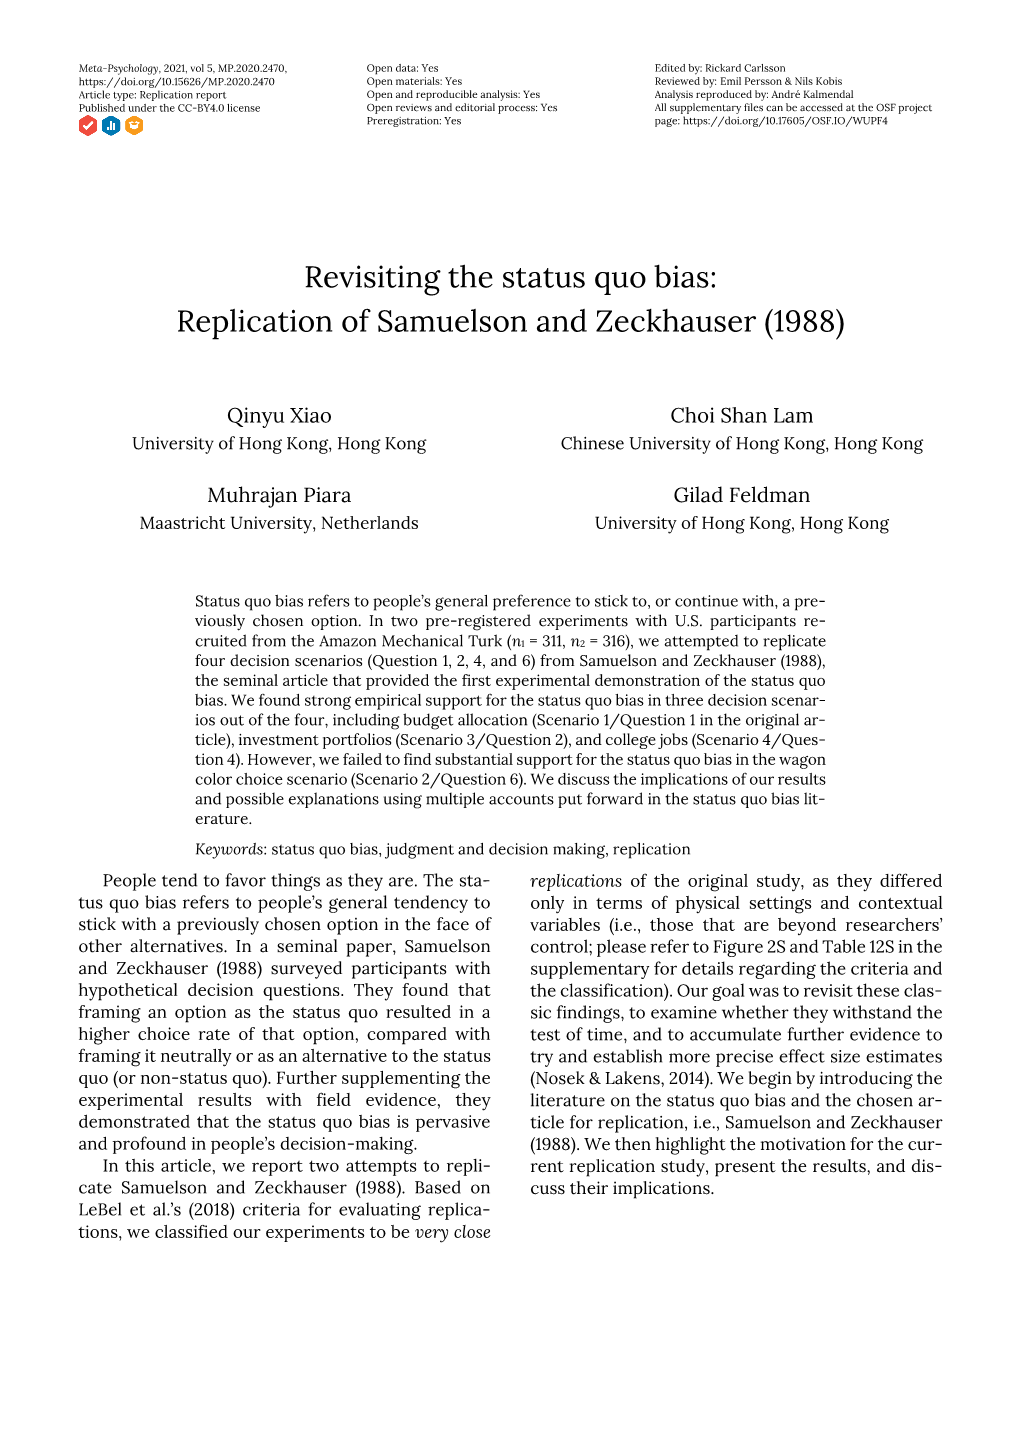 Revisiting the Status Quo Bias: Replication of Samuelson and Zeckhauser (1988)